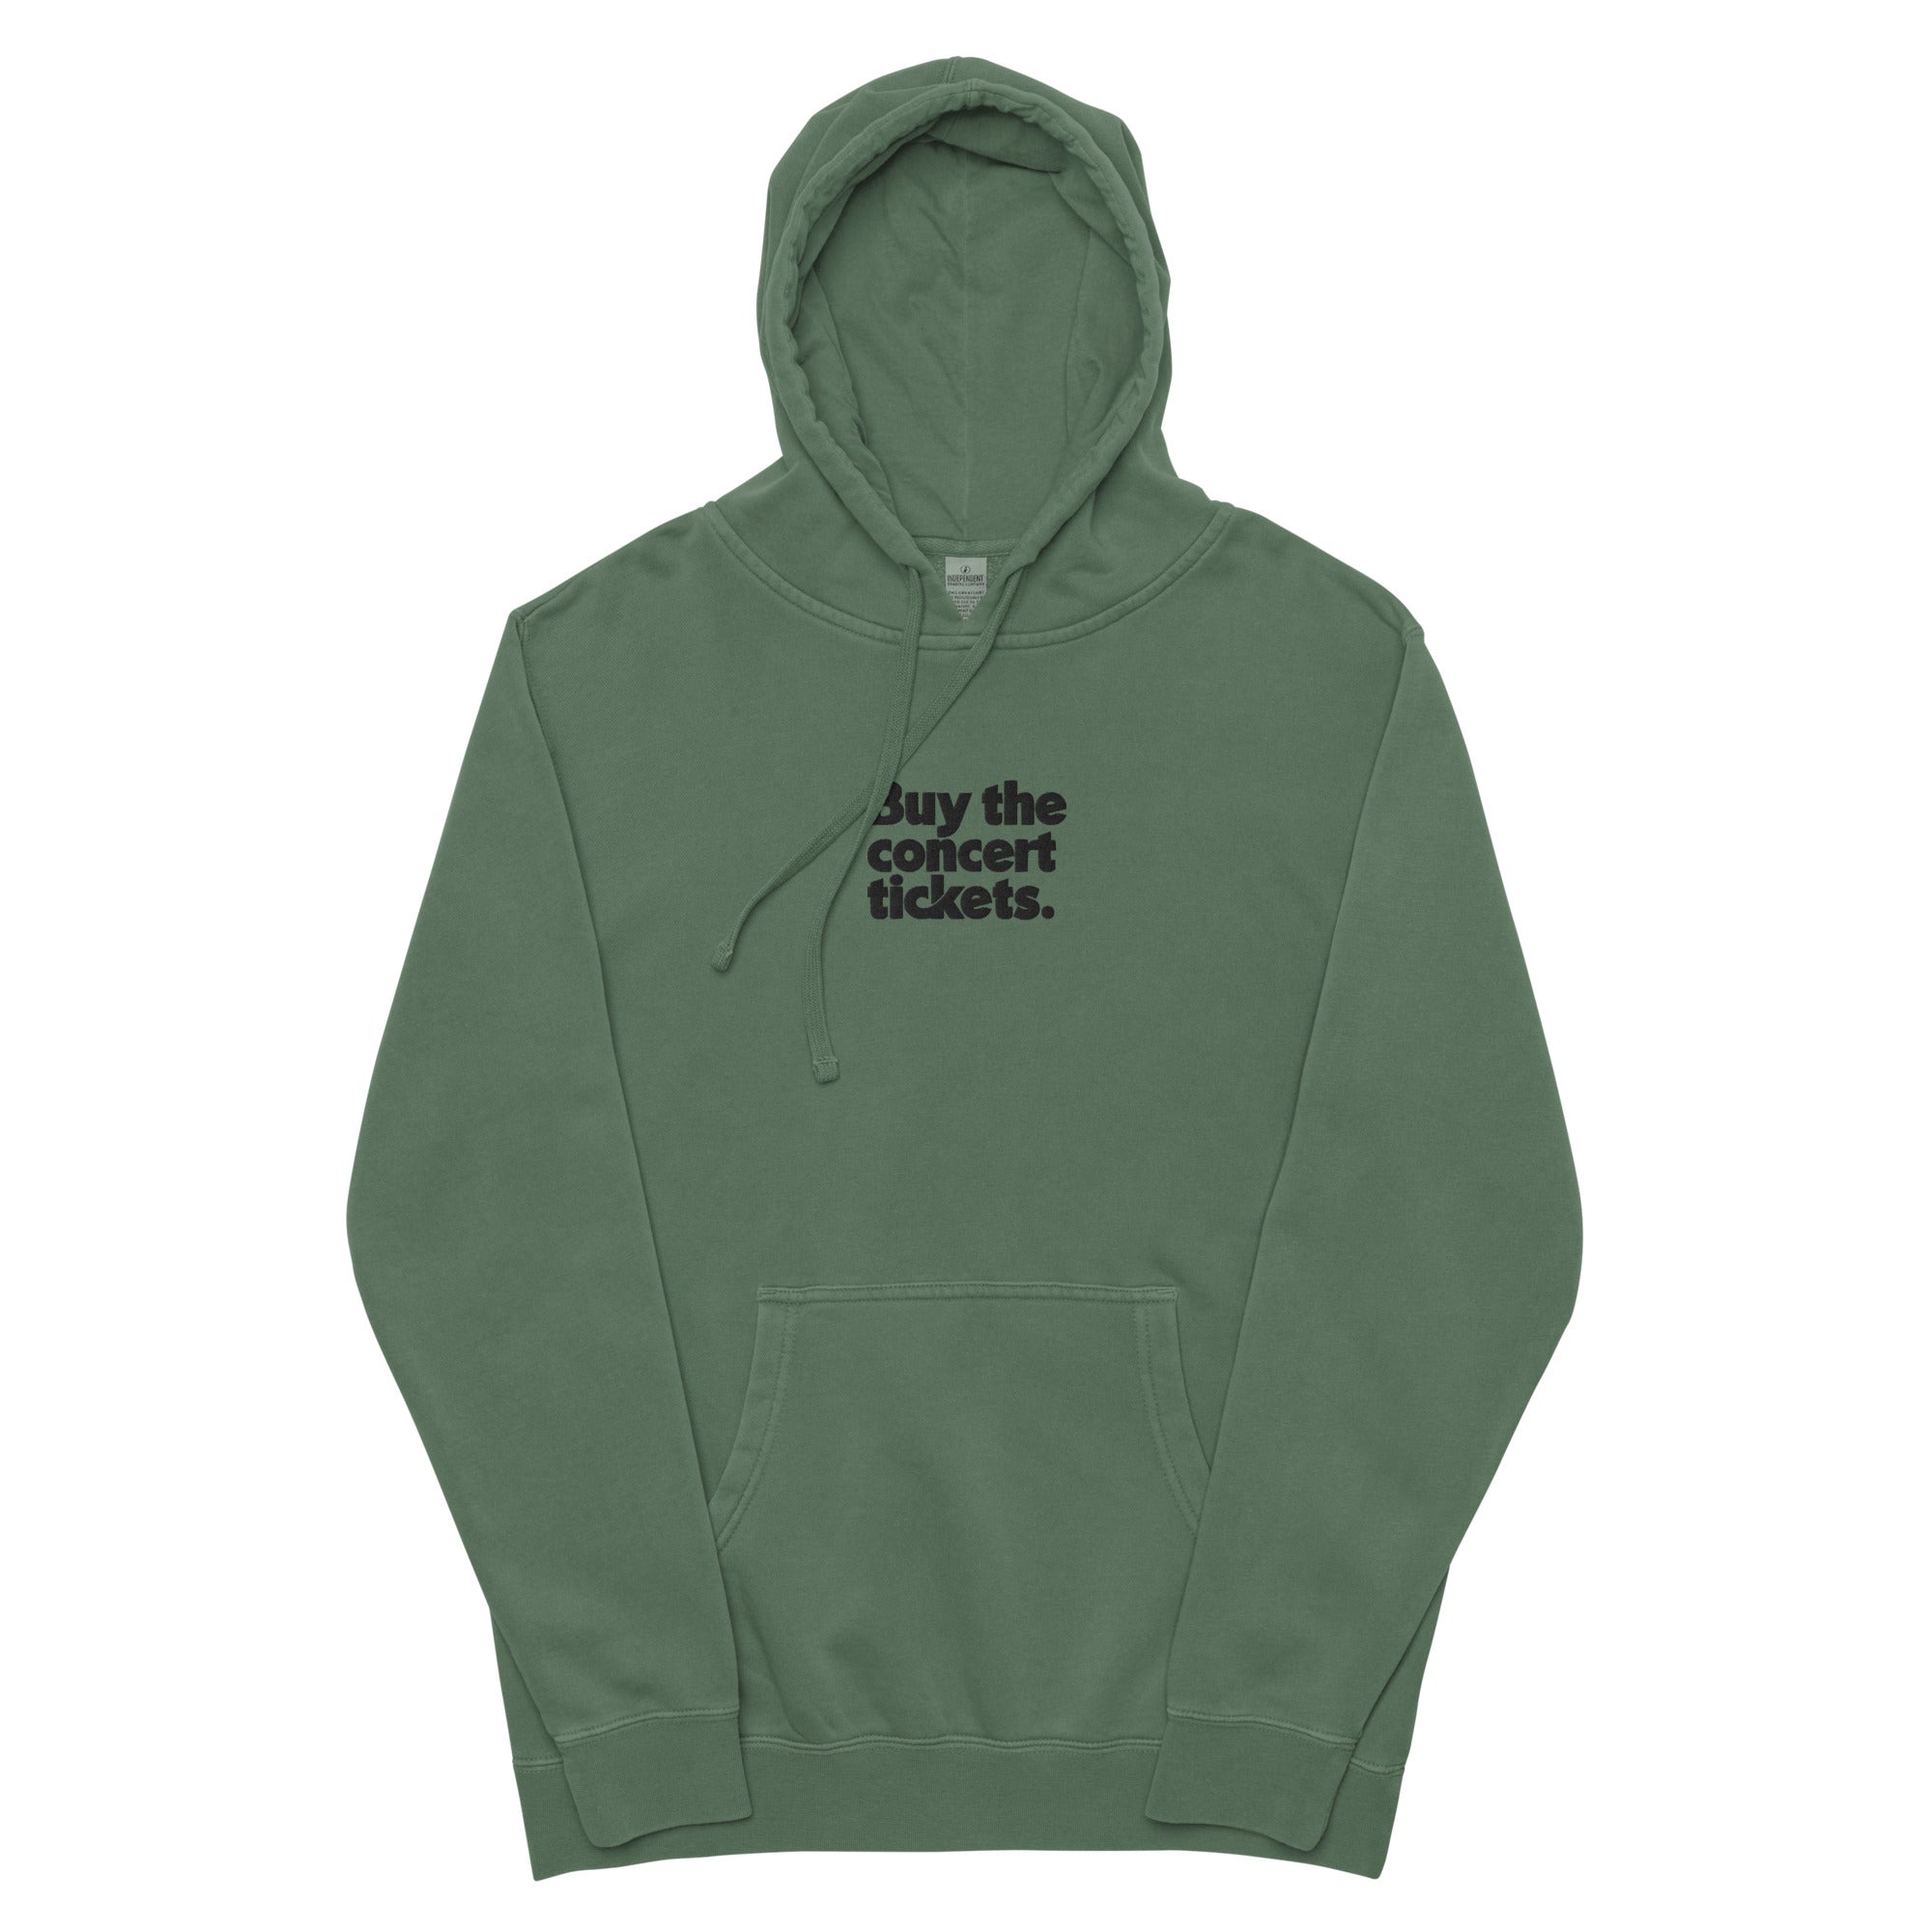 Concert Tickets - Embroidered Hoodie